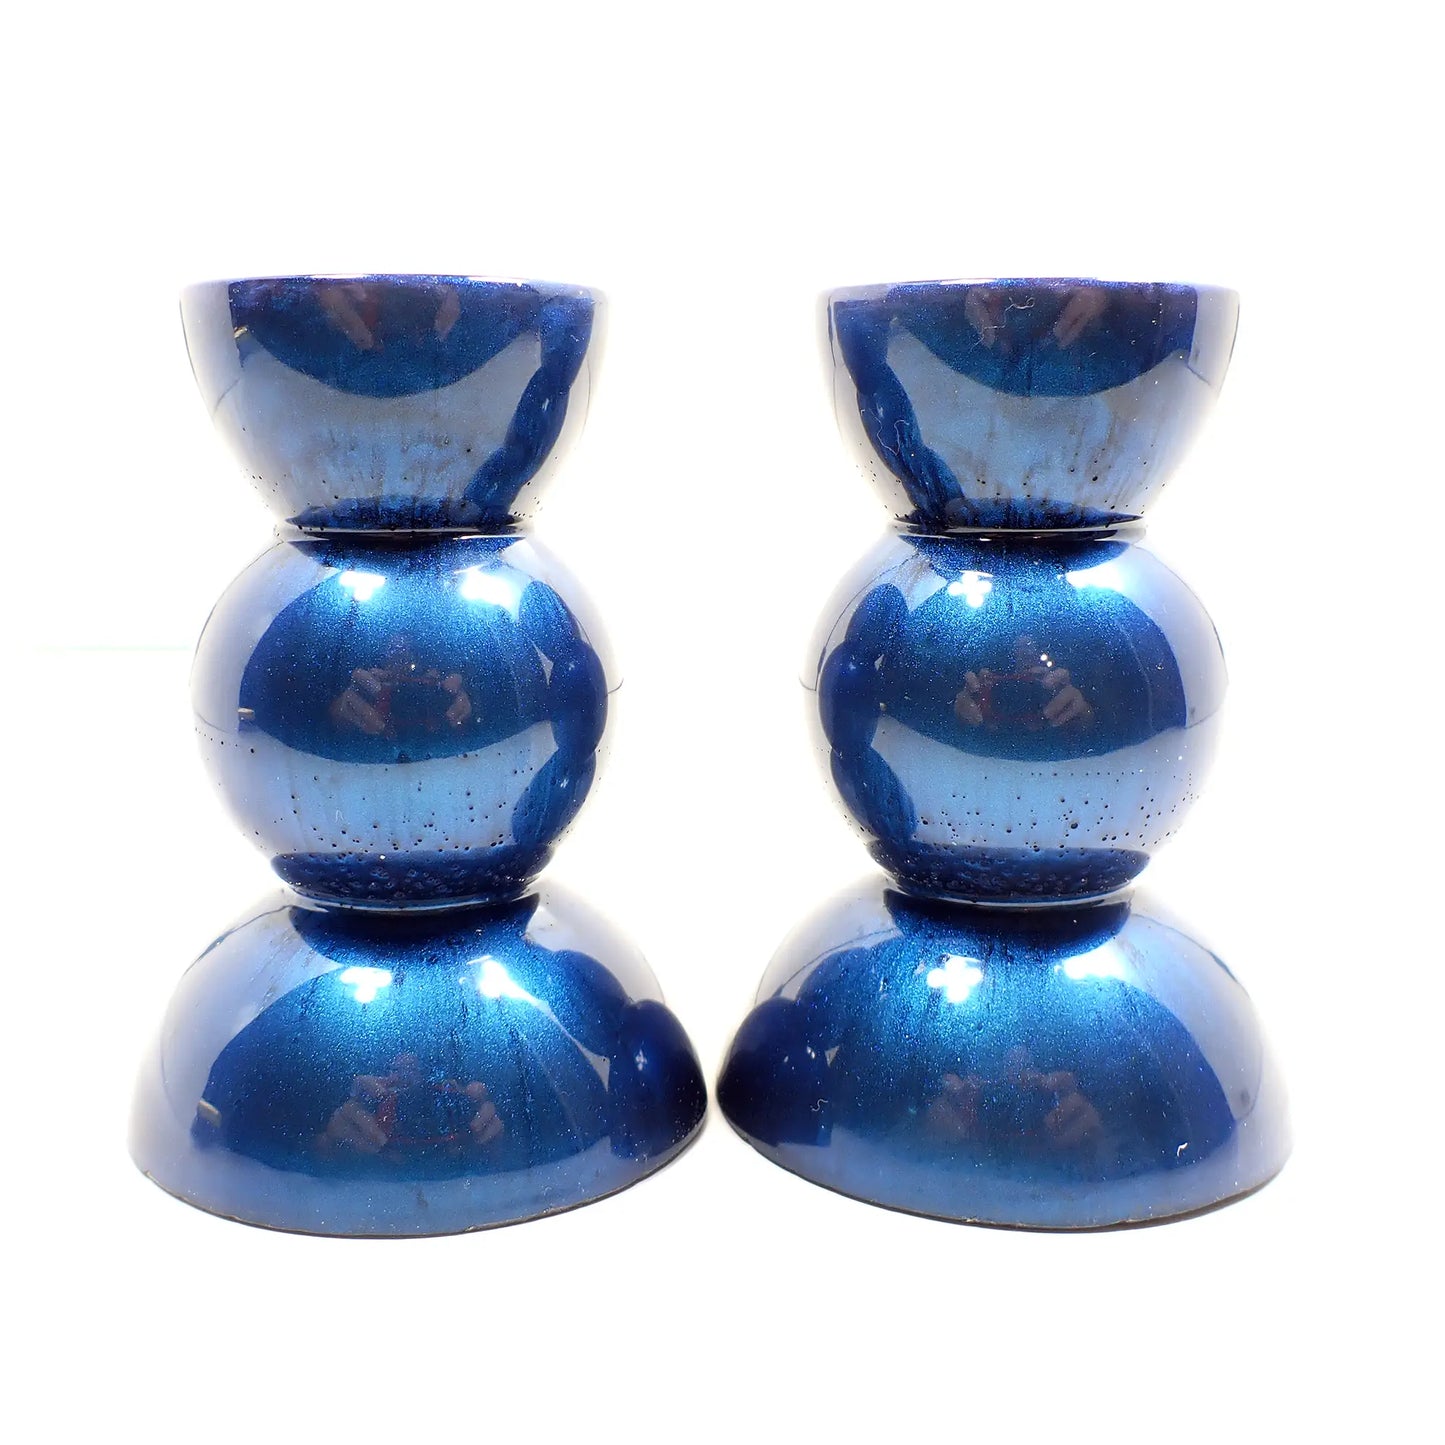 Set of Two Handmade Pearly Bright Denim Blue Resin Rounded Geometric Candlestick Holders